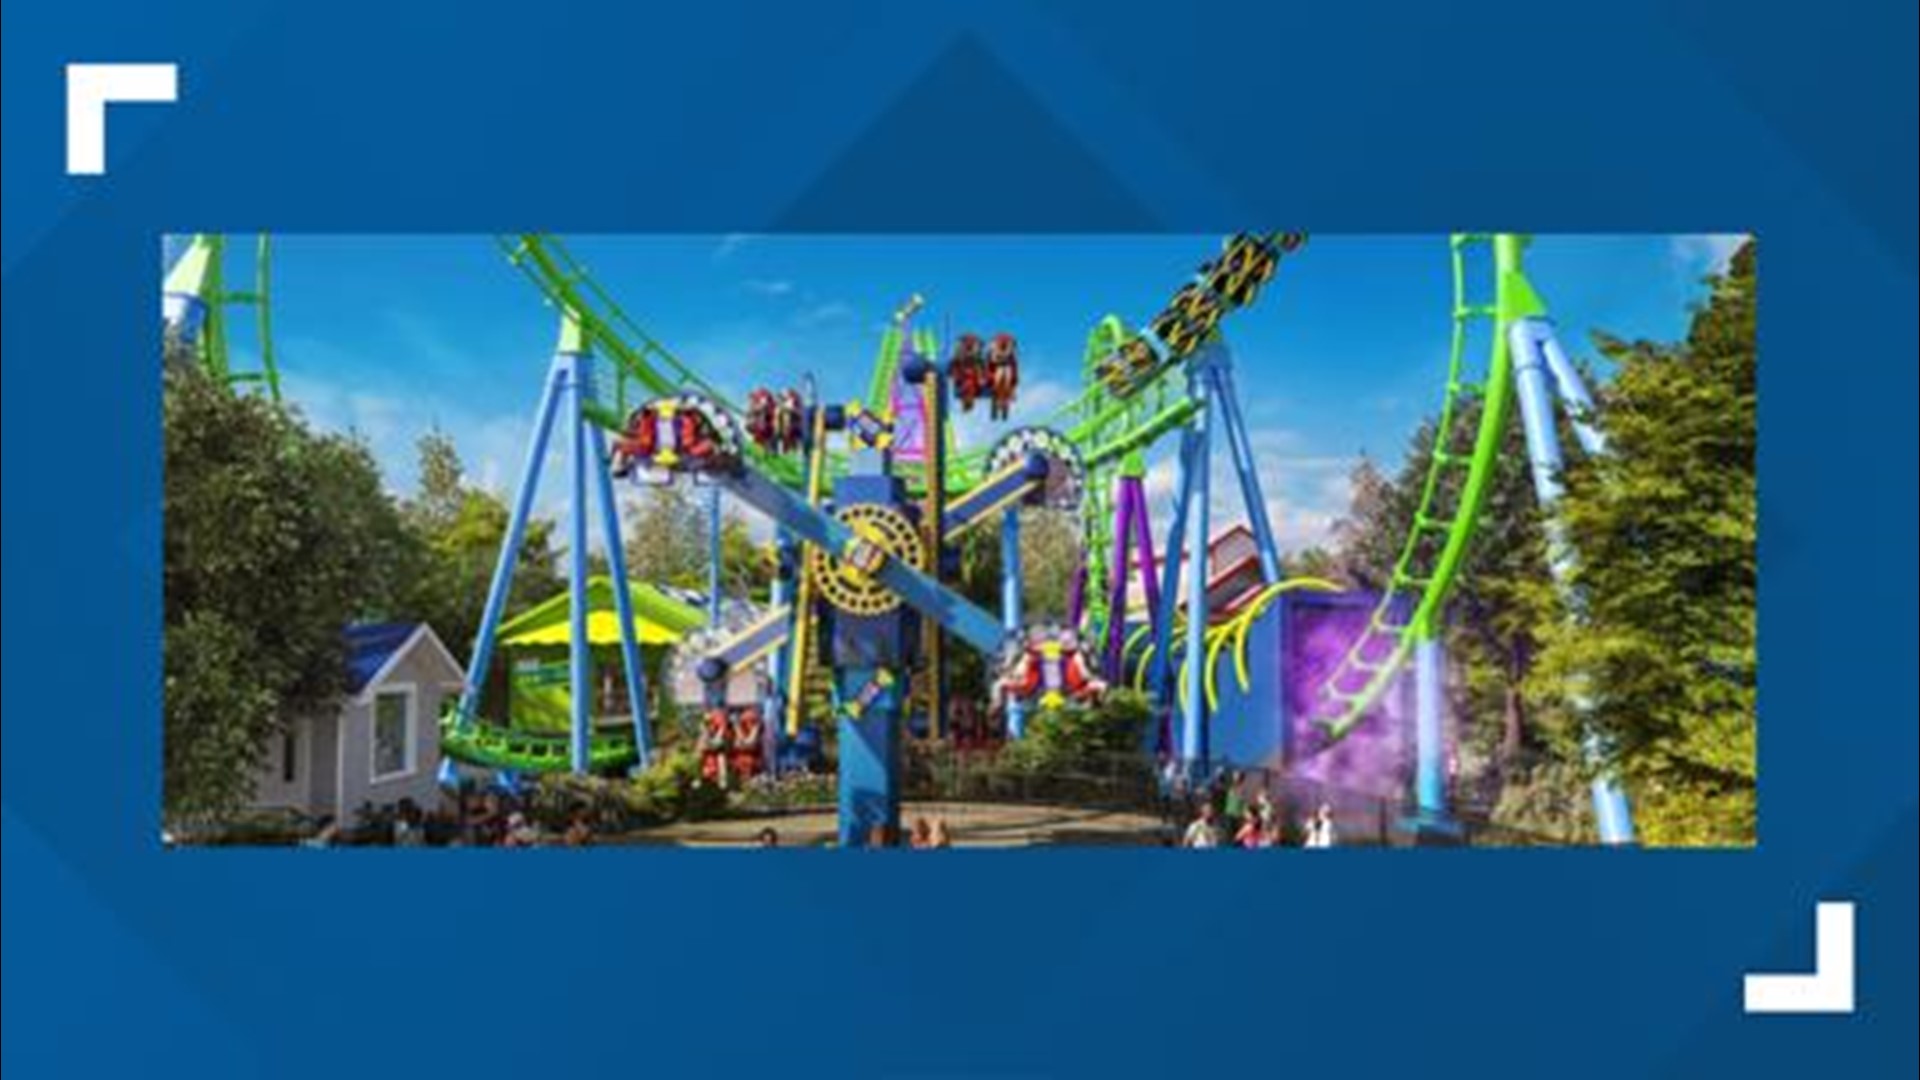 These rides only be at Hersheypark and they will be opening for the public on Sat., May 28.